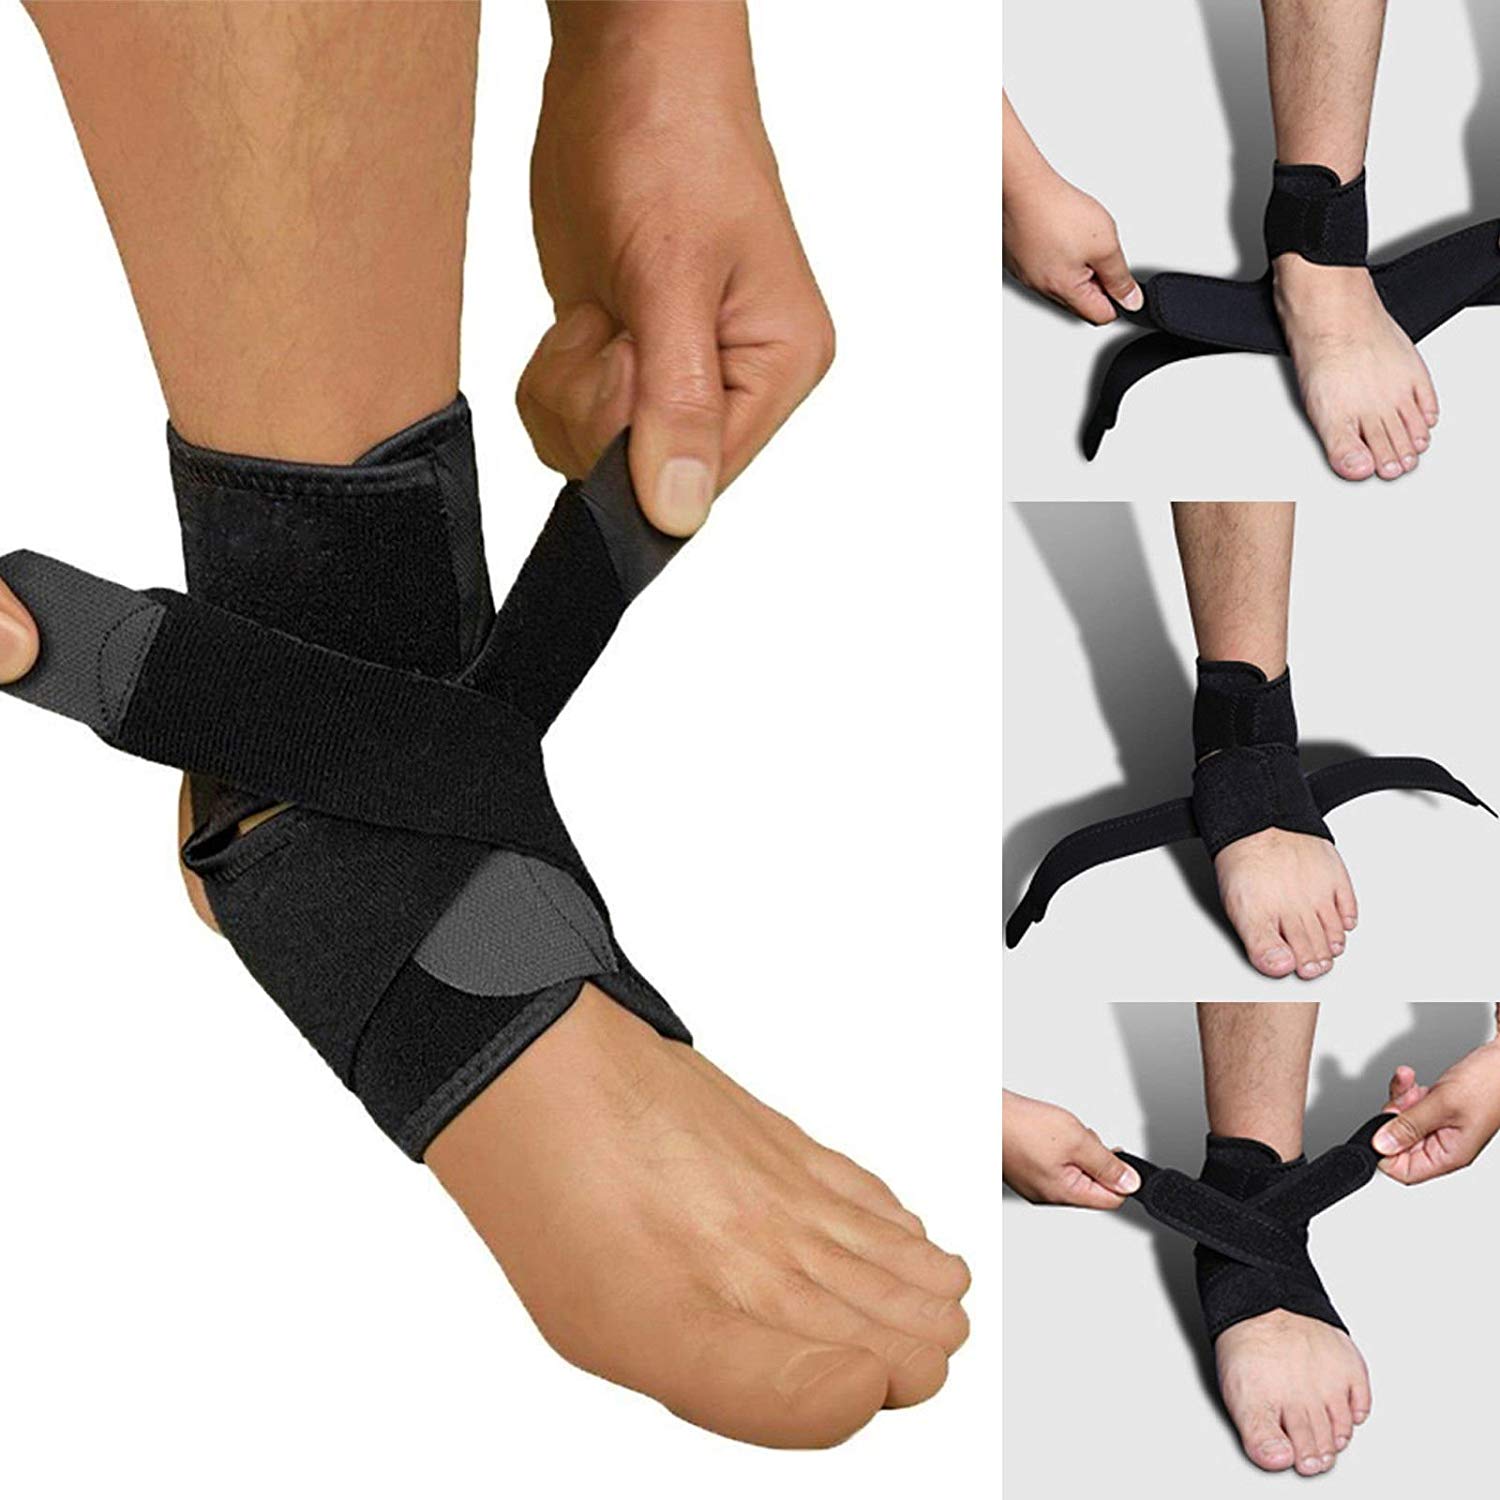 Ankle Support with Brace and Sleeve & Bandage Wrap For Foot Compression Brace Guard Brace for Arthritis, Pain Relief, Sprains, Sports Injuries